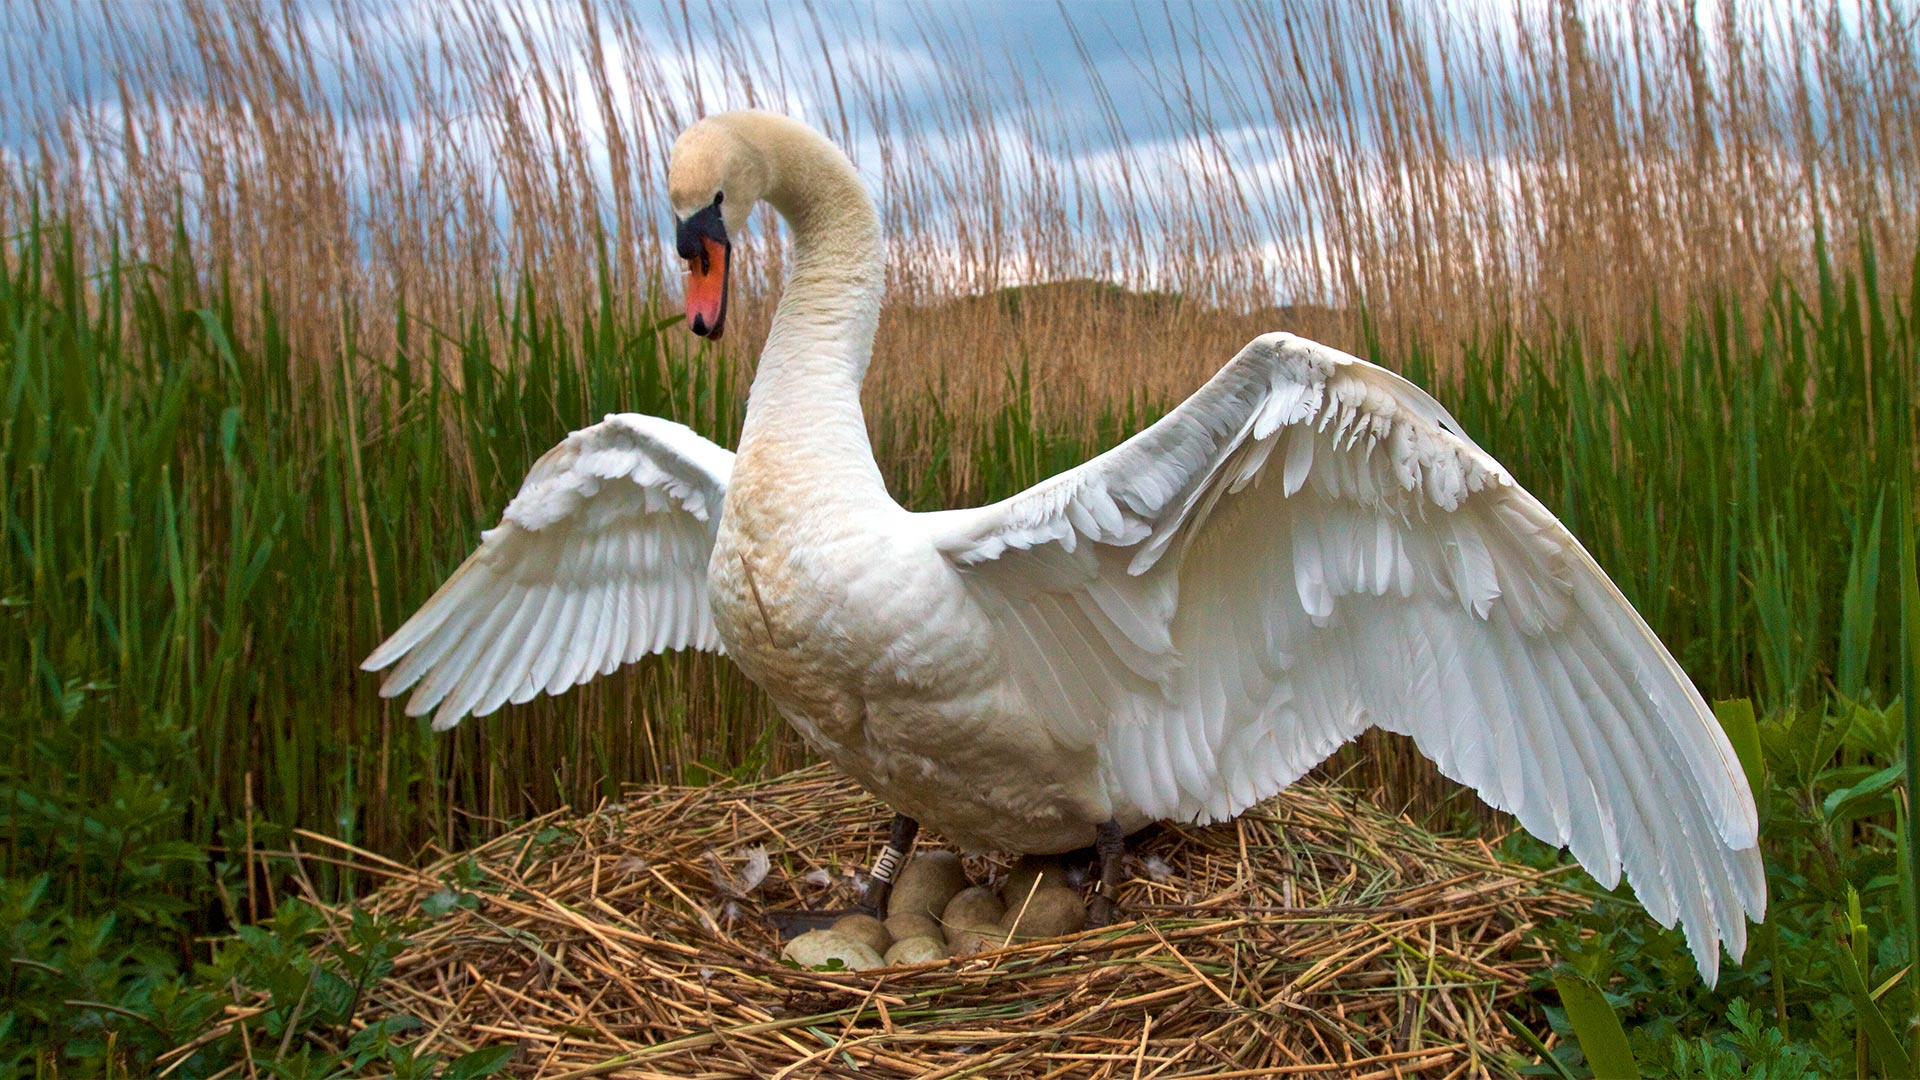 Male swans often do some of the incubation, but not as much as the females because female swans have a centrally heated brood patch on their bellies.